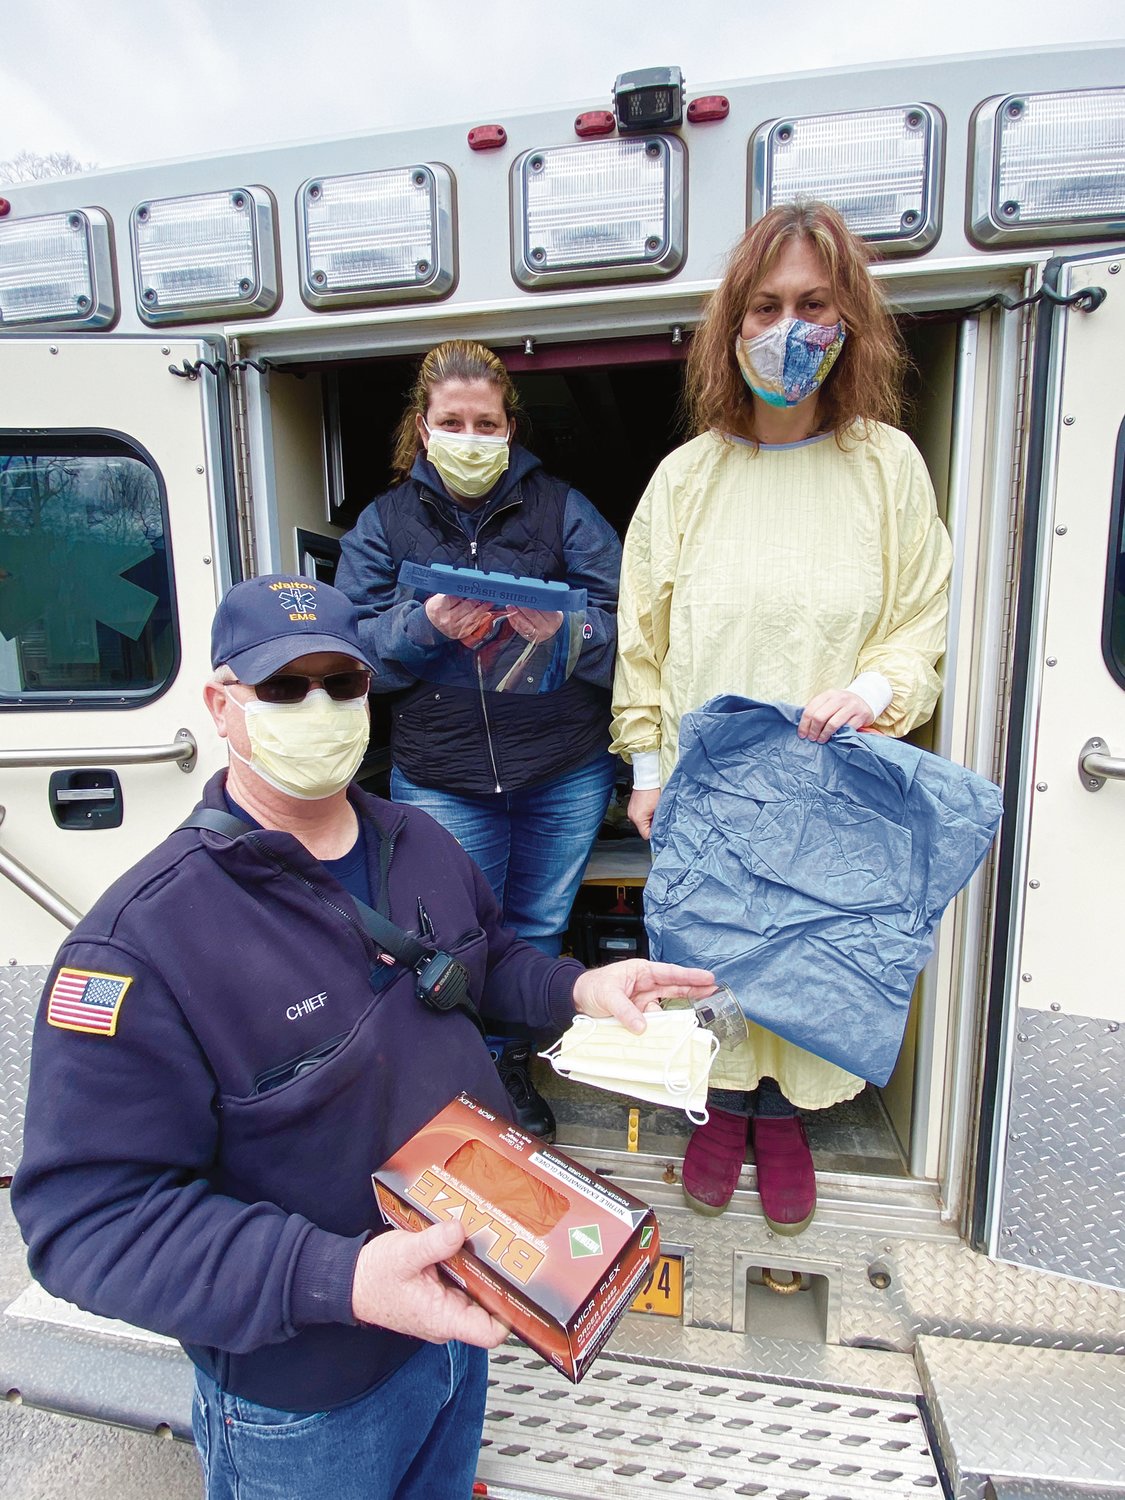 Walton Fire Chief Frank Wood, EMS Squad Captain Jessica Gilmore and Volunteer Maureen Babcock display the PPE (personal protective equipment) donated by Walton businesses and individuals.